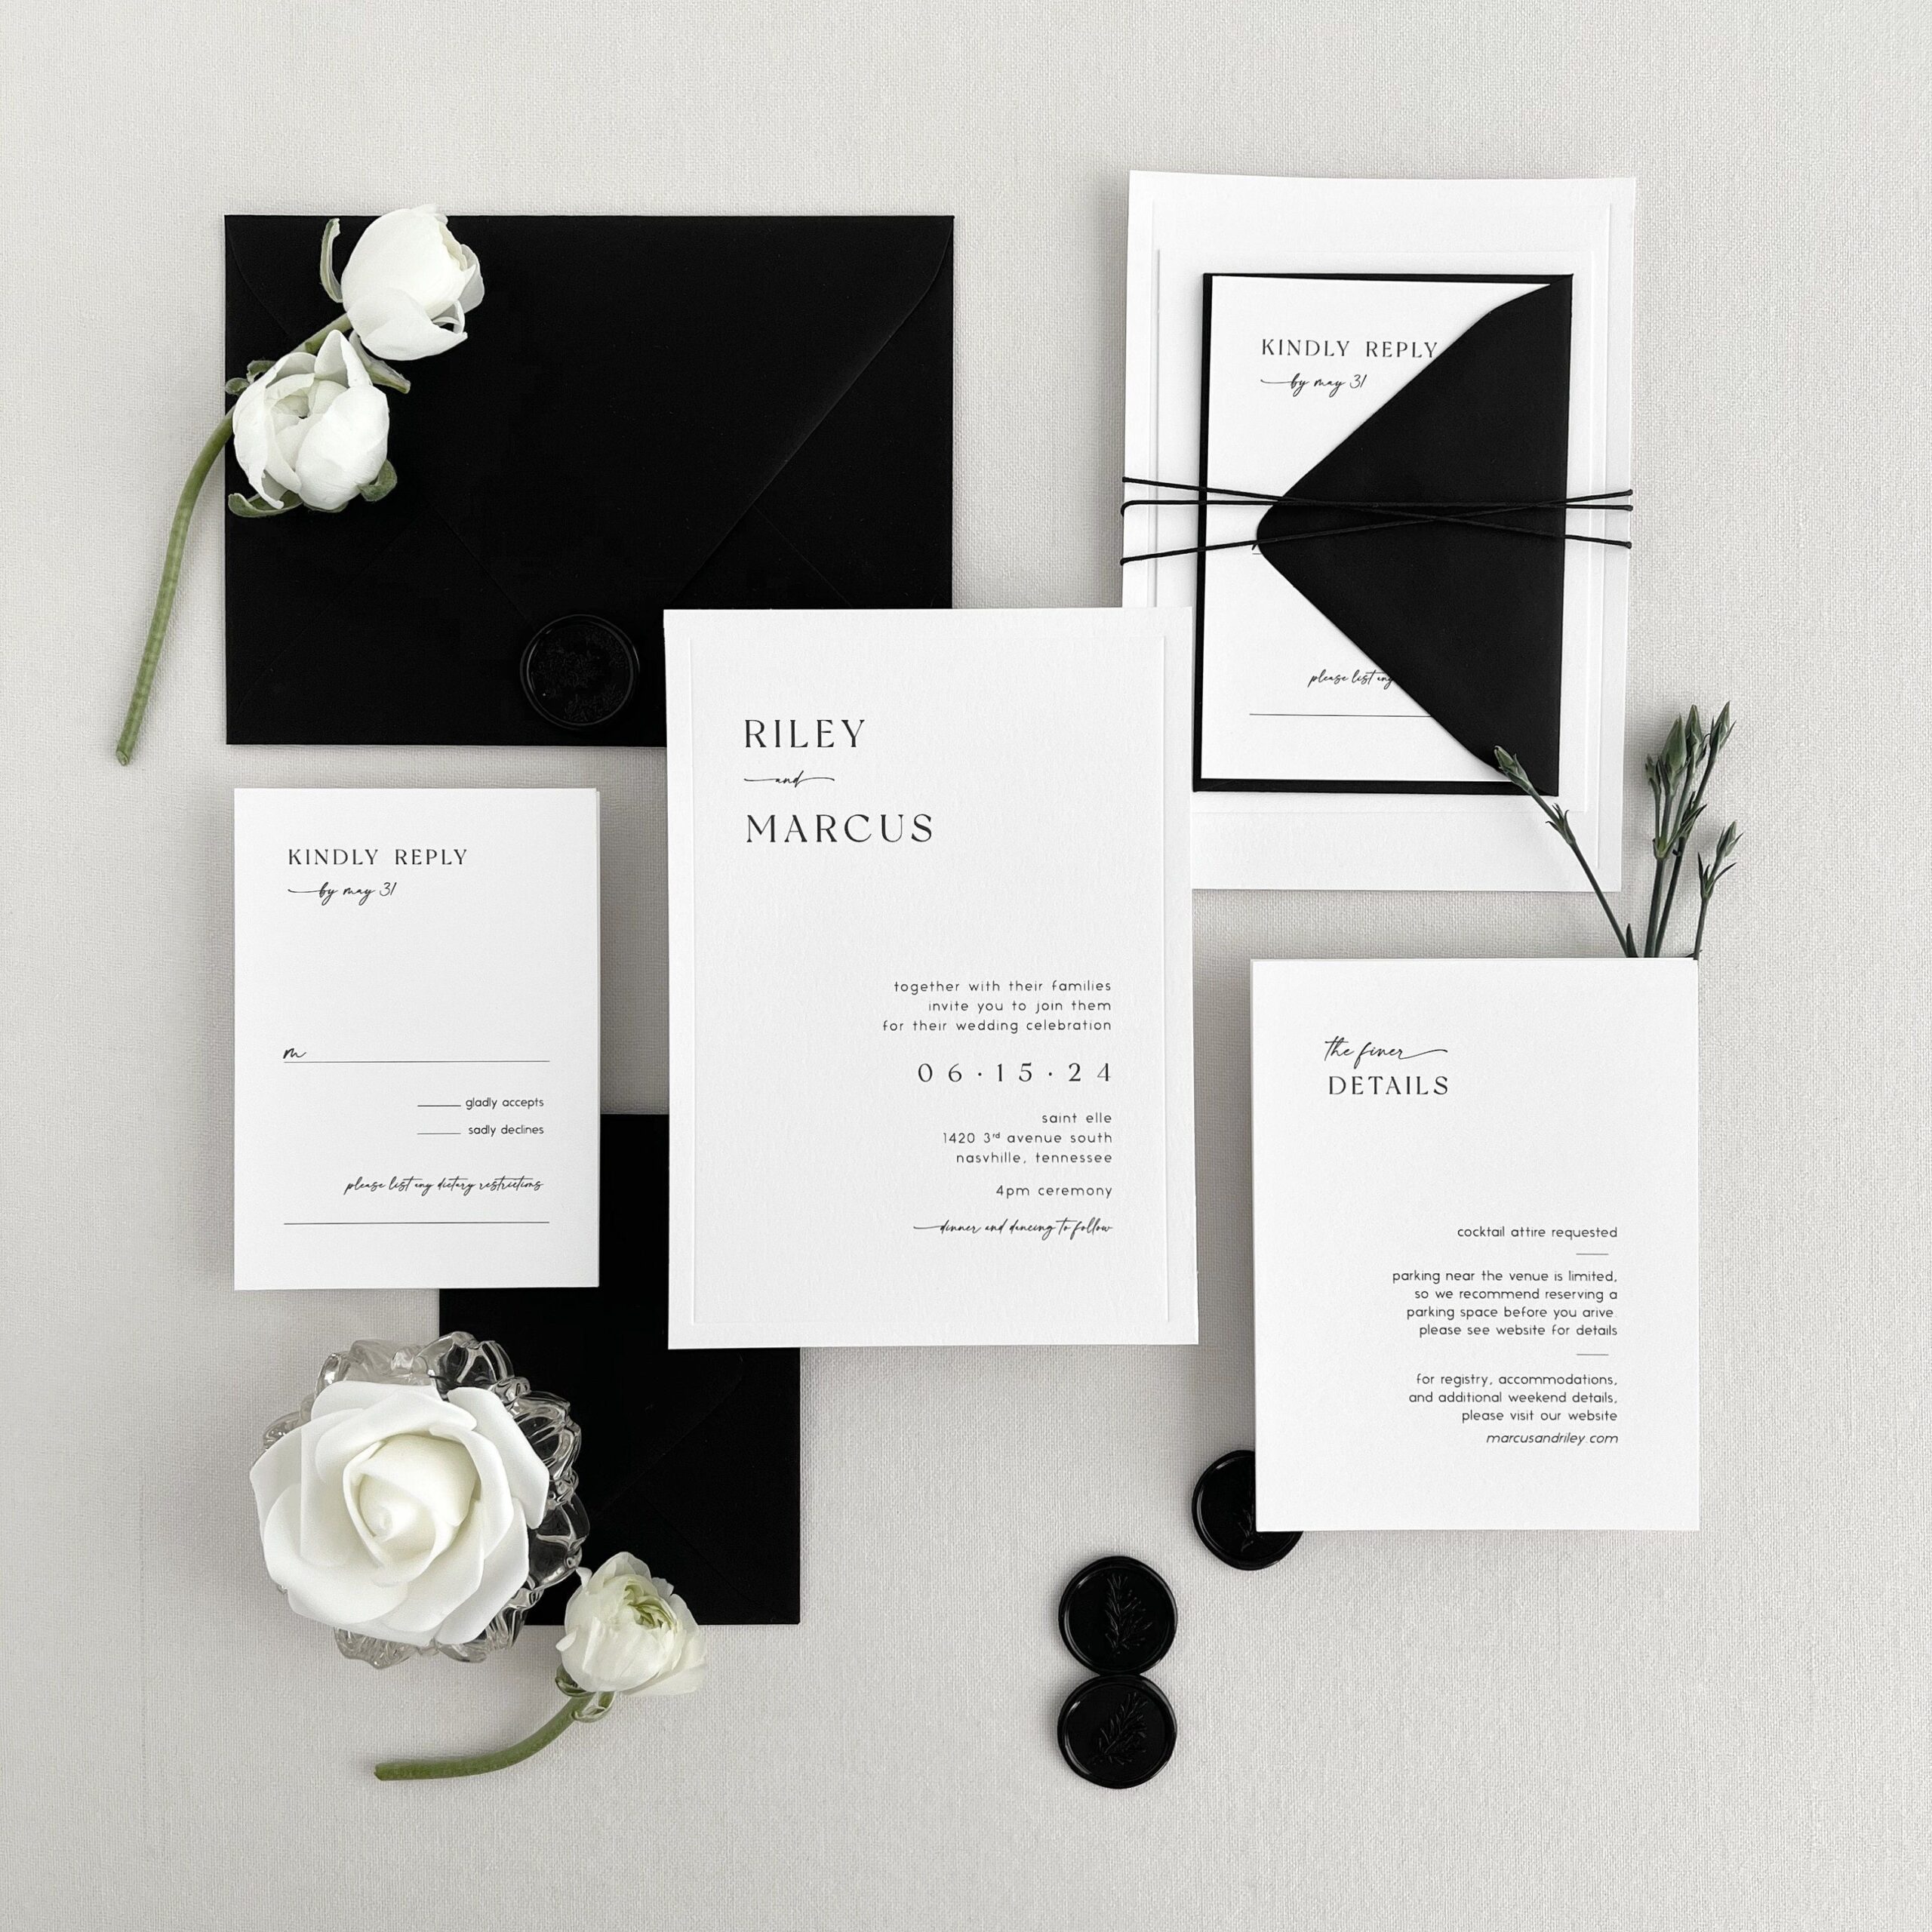 6 Wedding Invitation Tips To Inspire Your Own Design